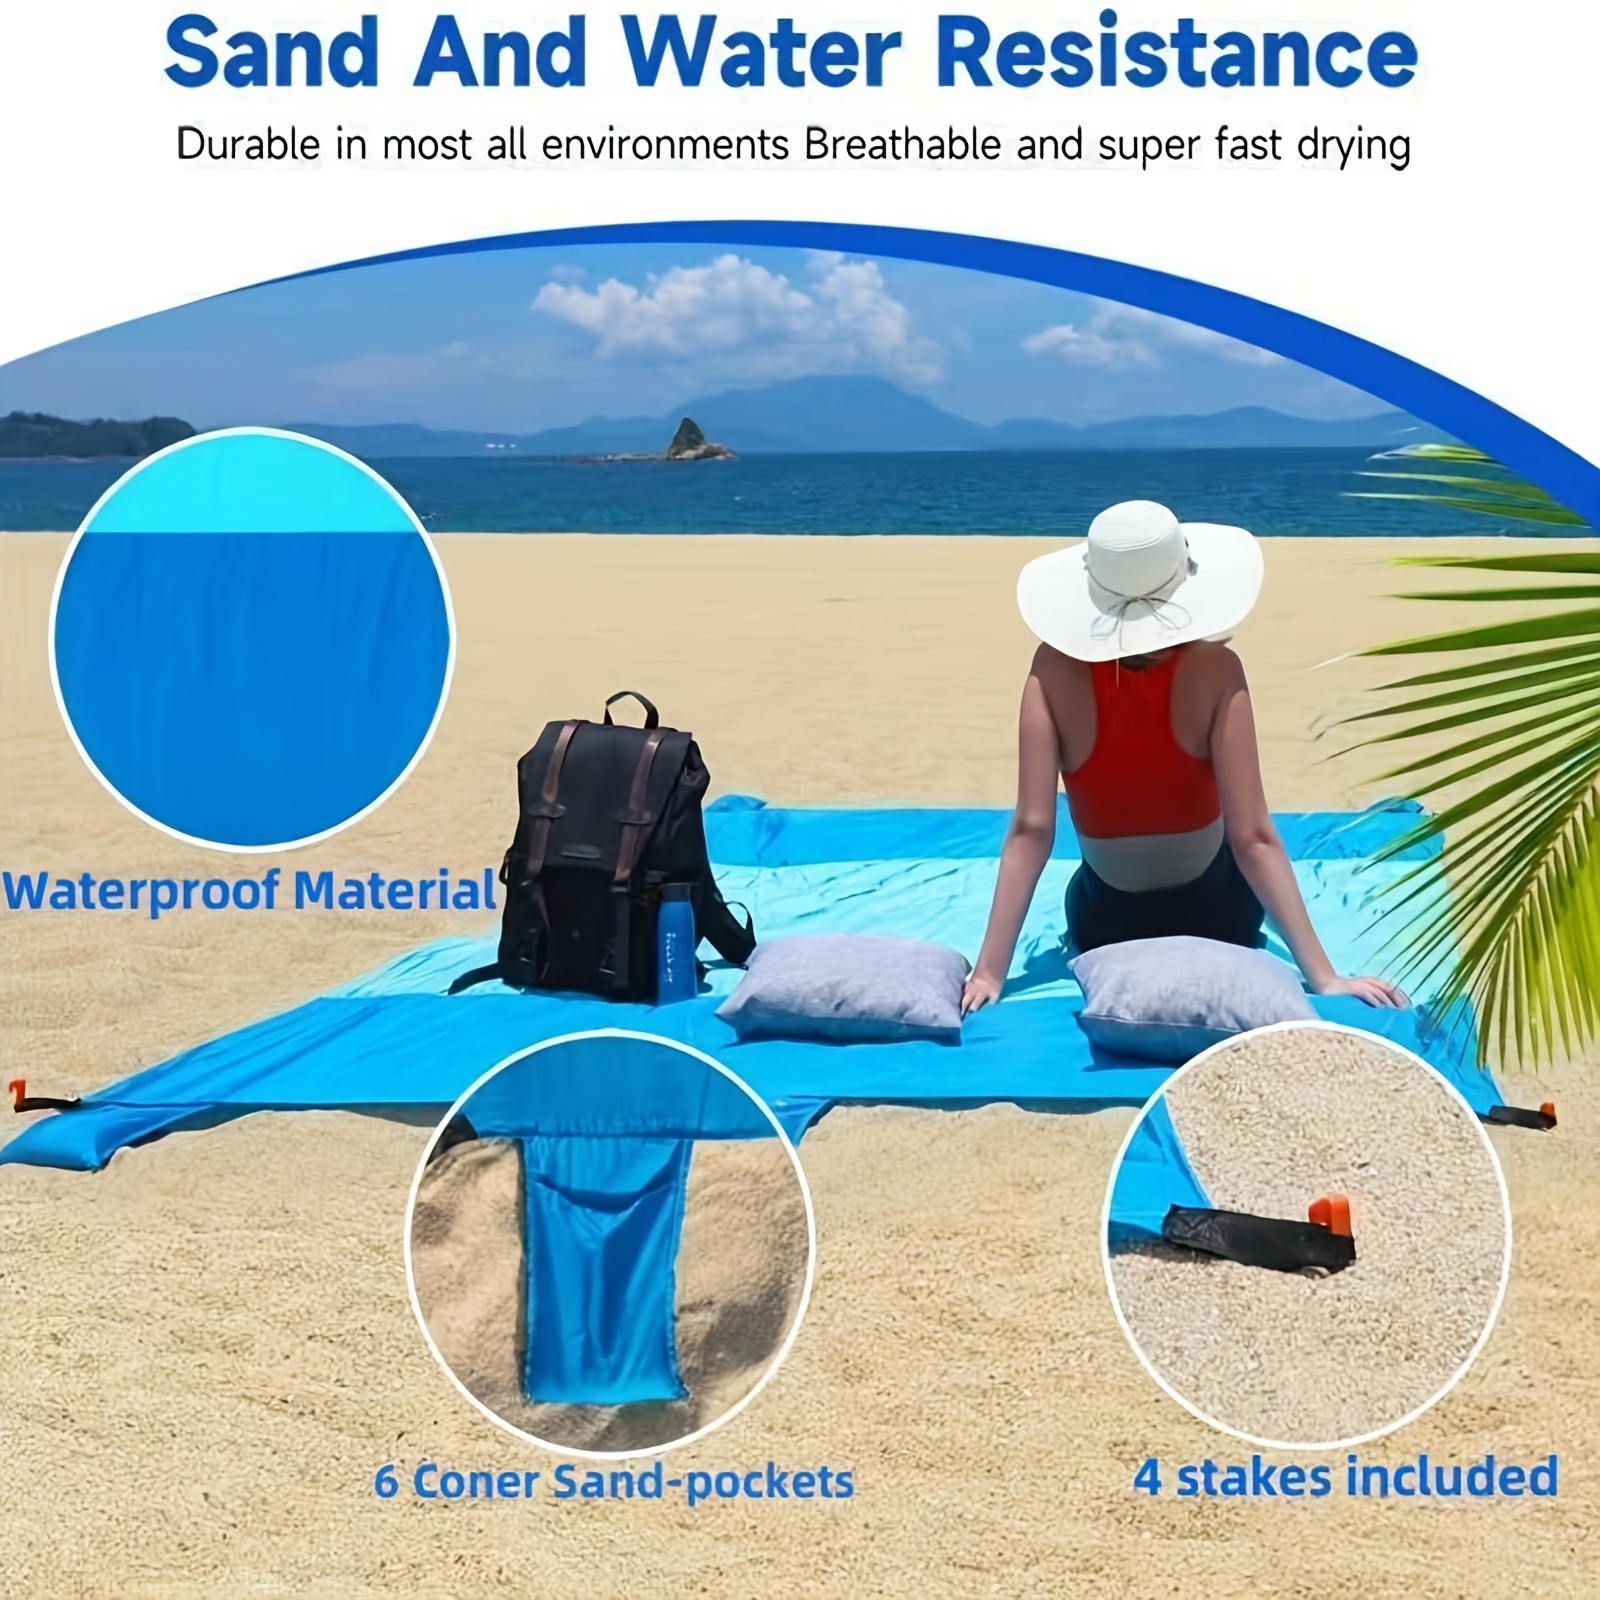 This Sand-Resistant Beach Bag Is 'Spacious' and 'Lightweight